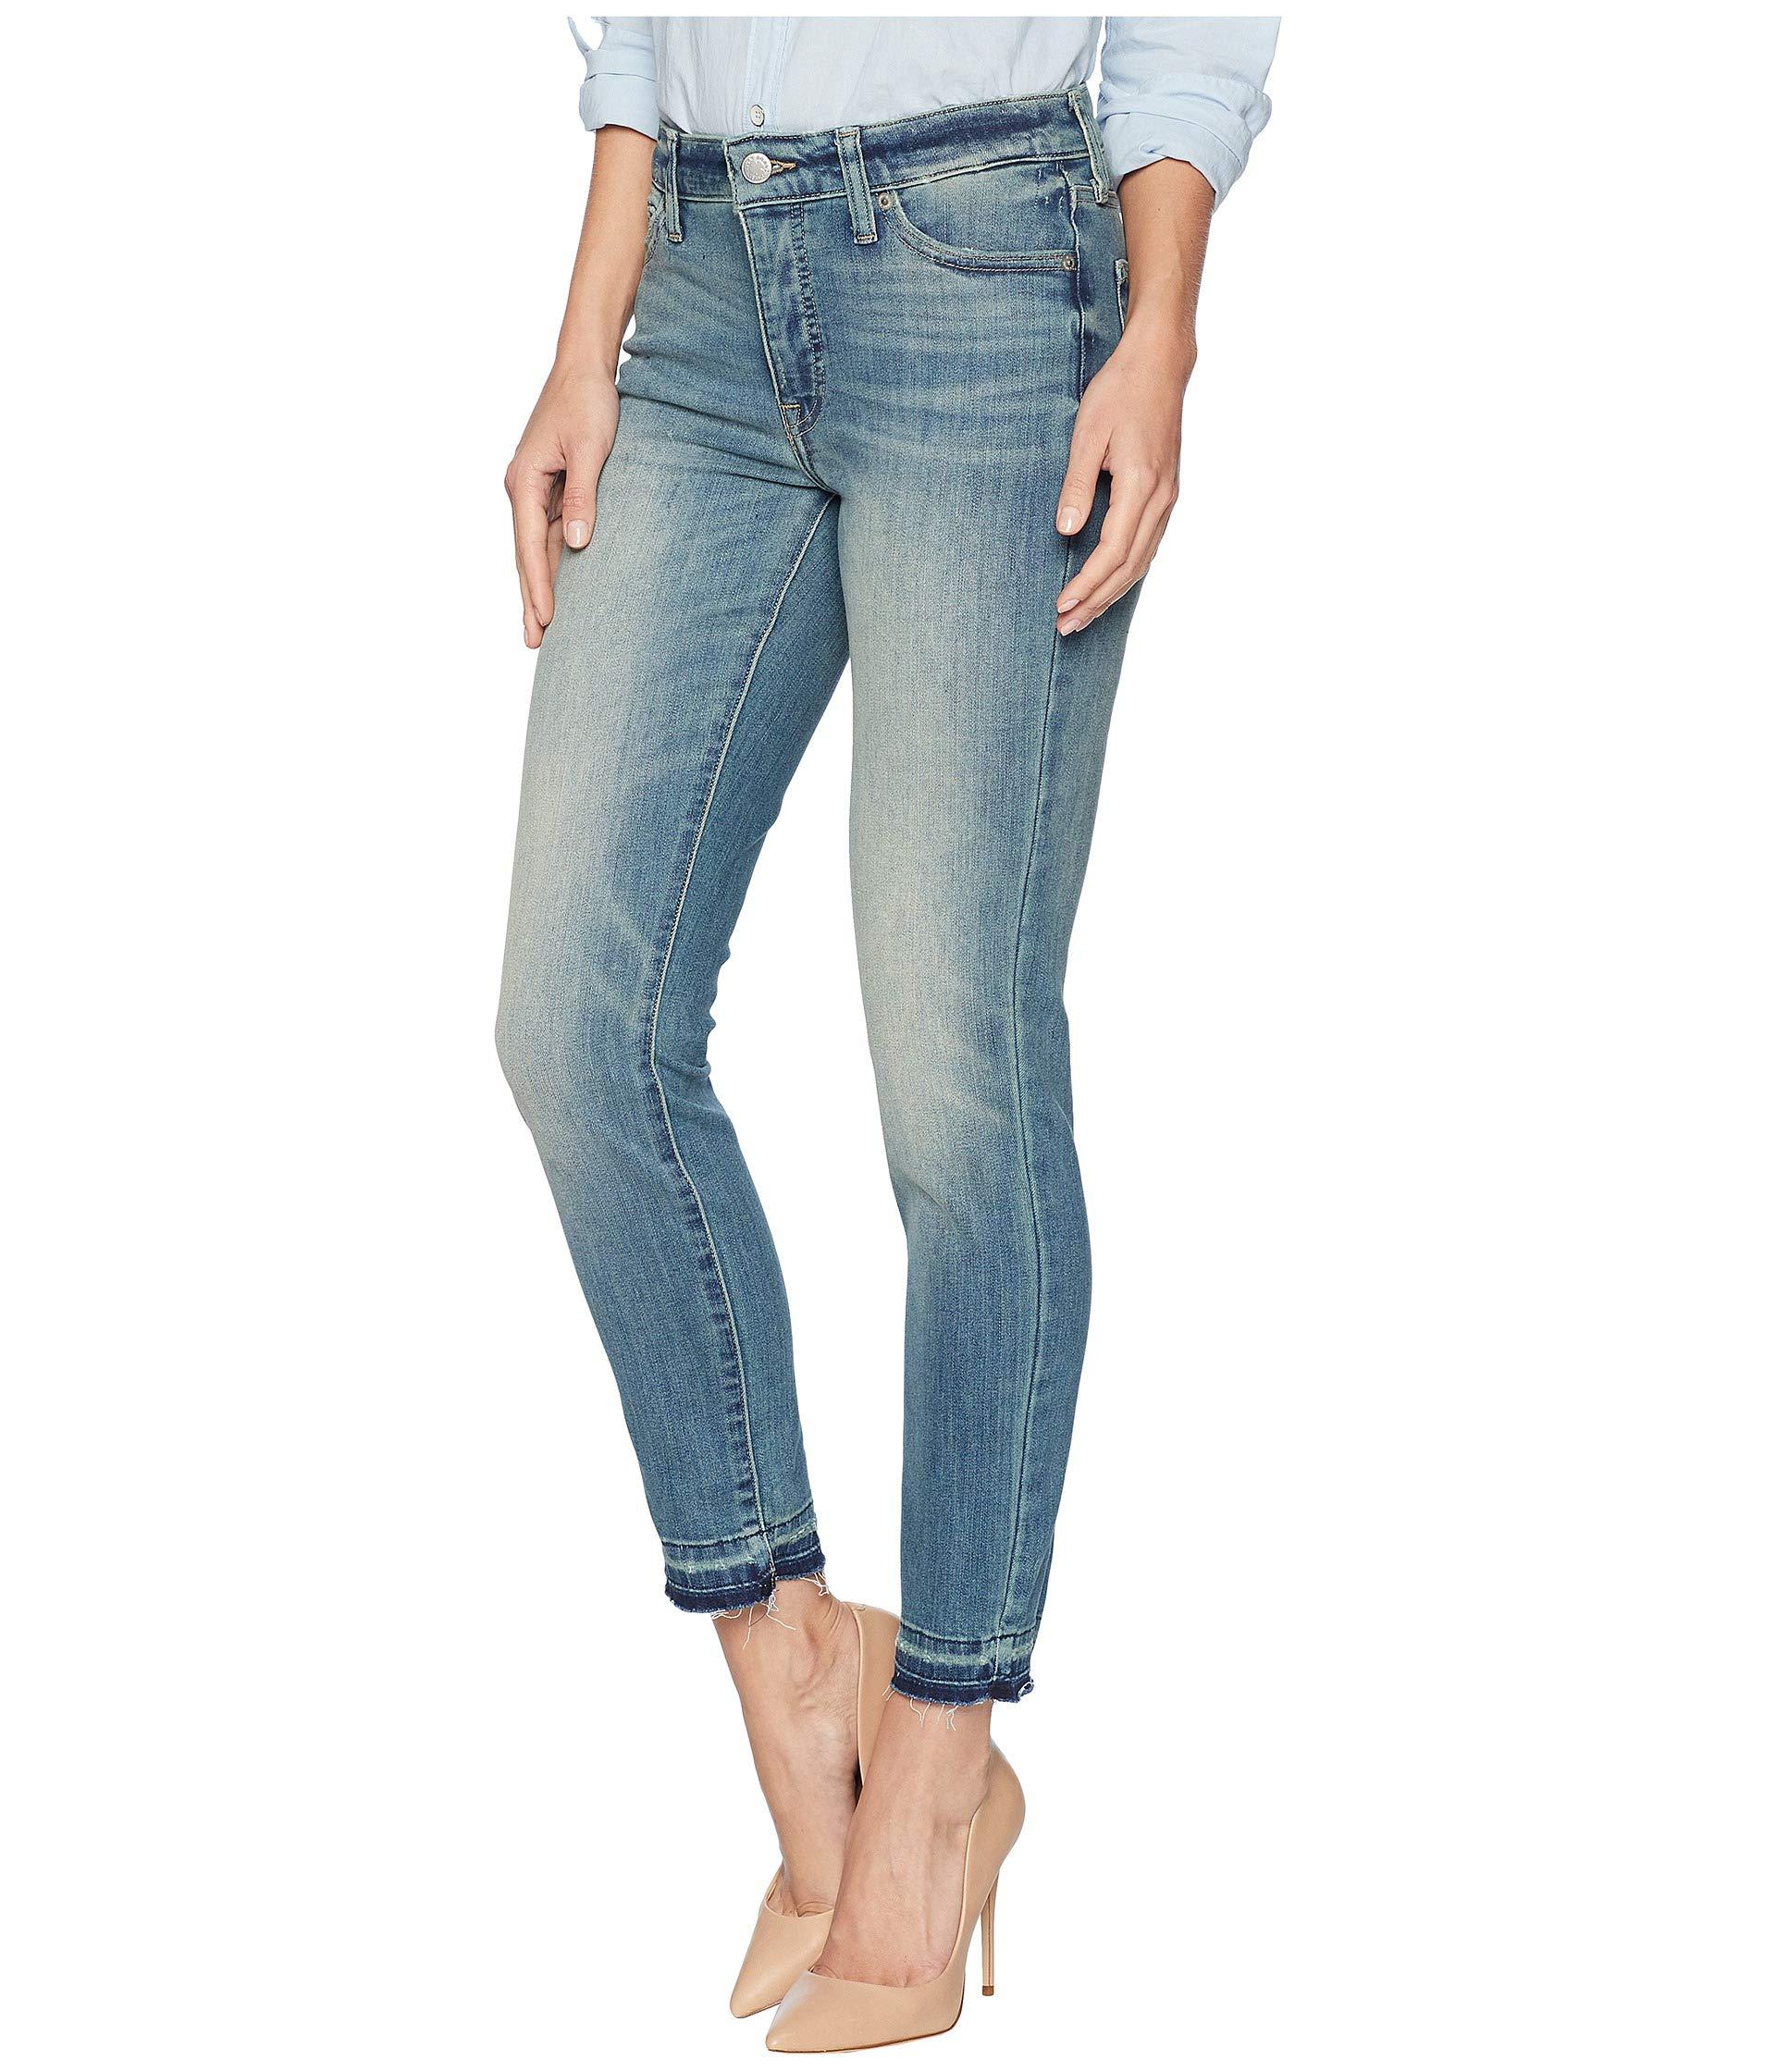 Lyst - Lucky Brand Hayden High-rise Skinny Jeans In Green Valley in Blue